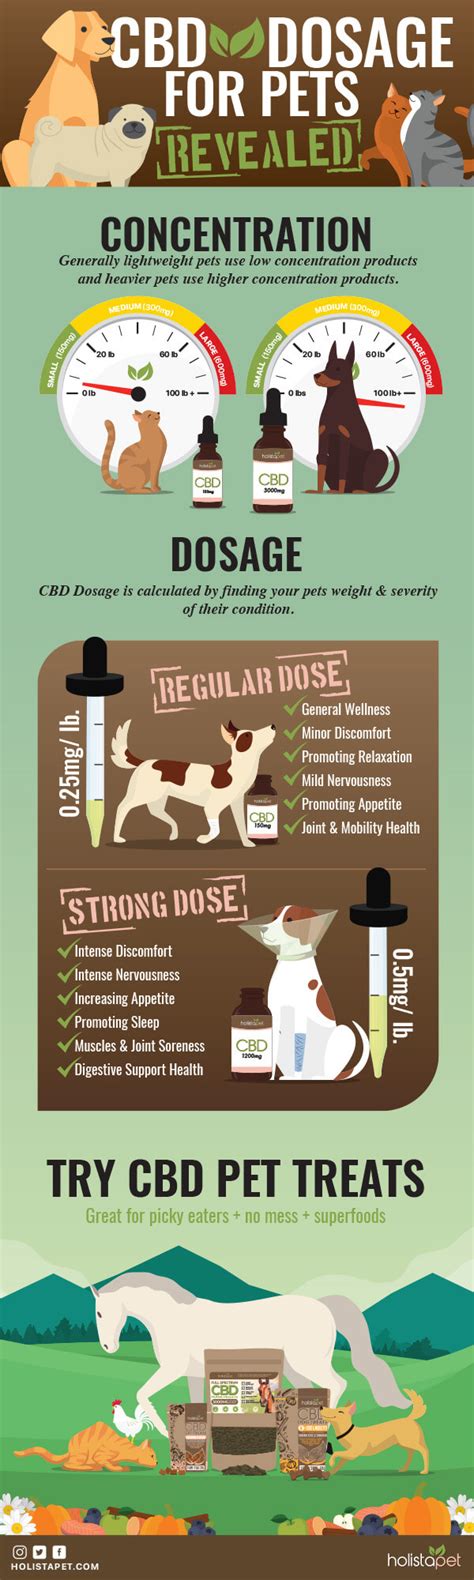  How much CBD oil you give your dog depends on their breed, size, and how hyper they are